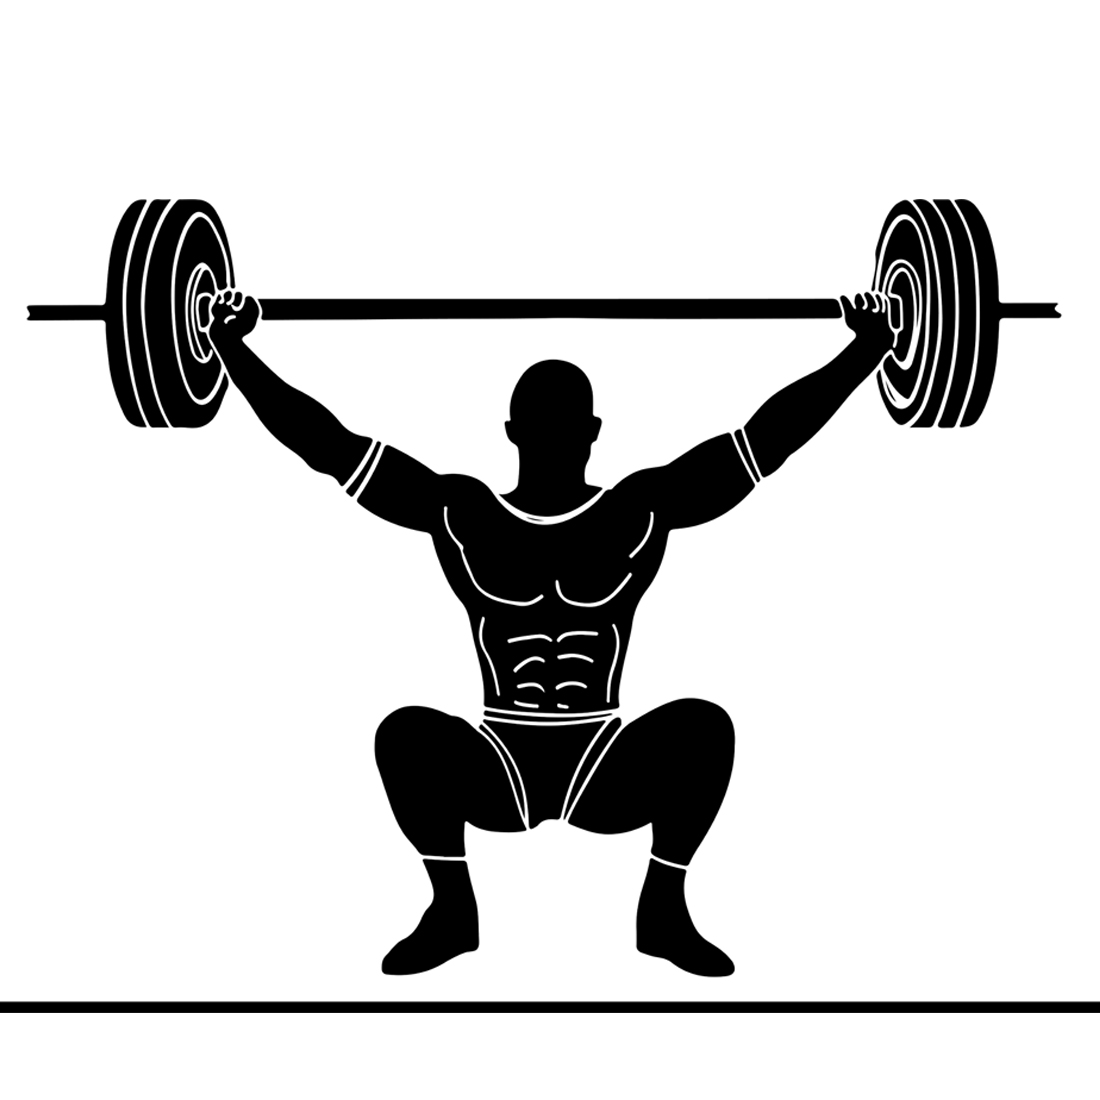 barbell silhouette vector